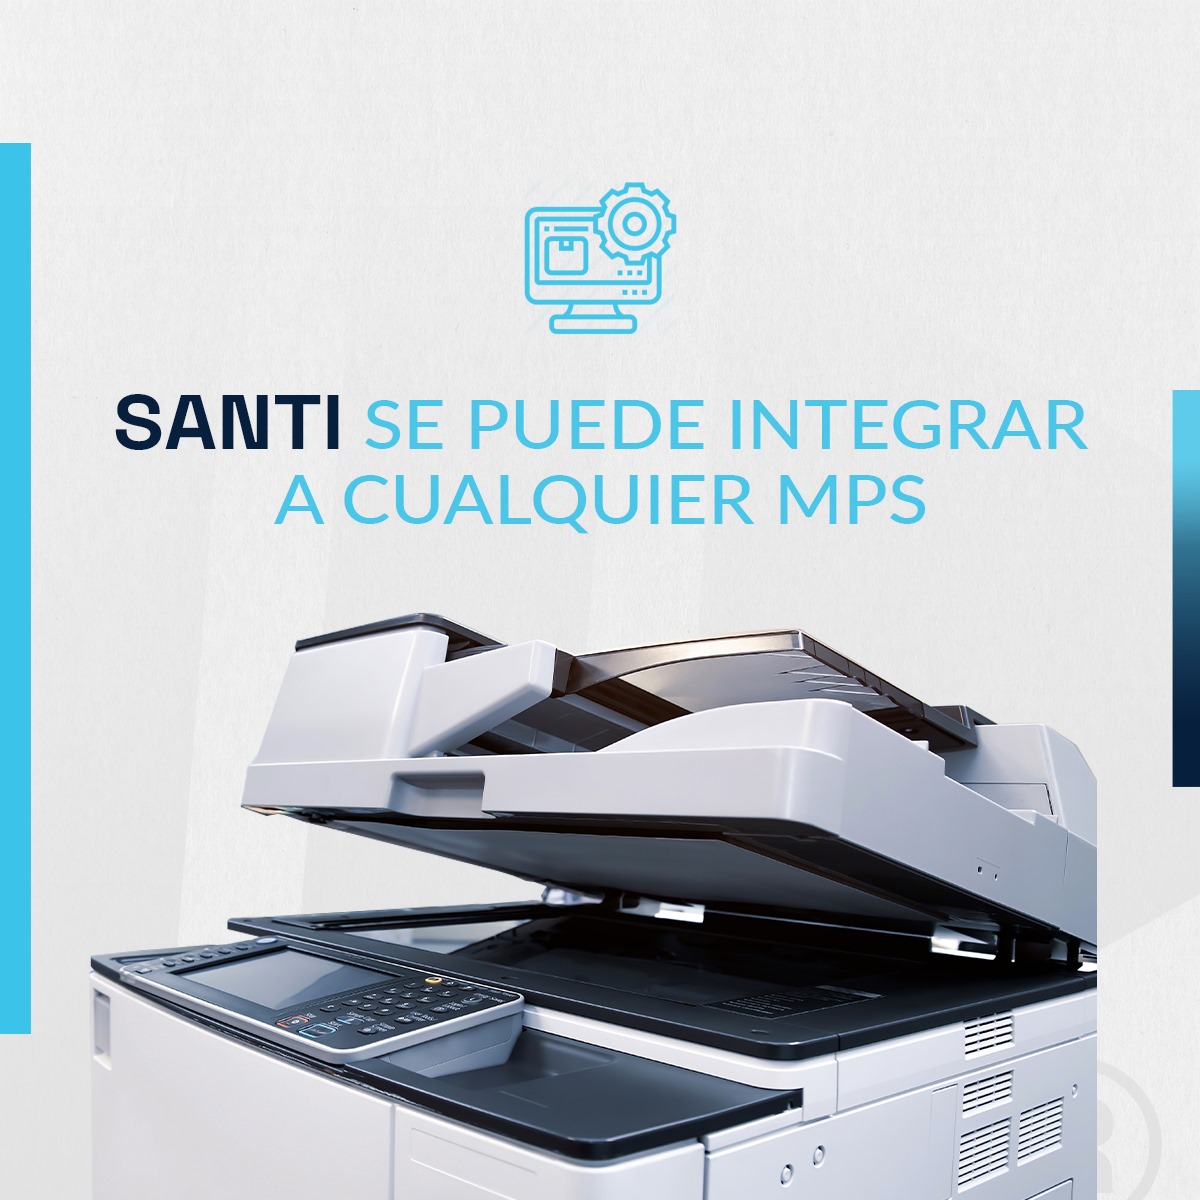 SANTI can be integrated into any MPS